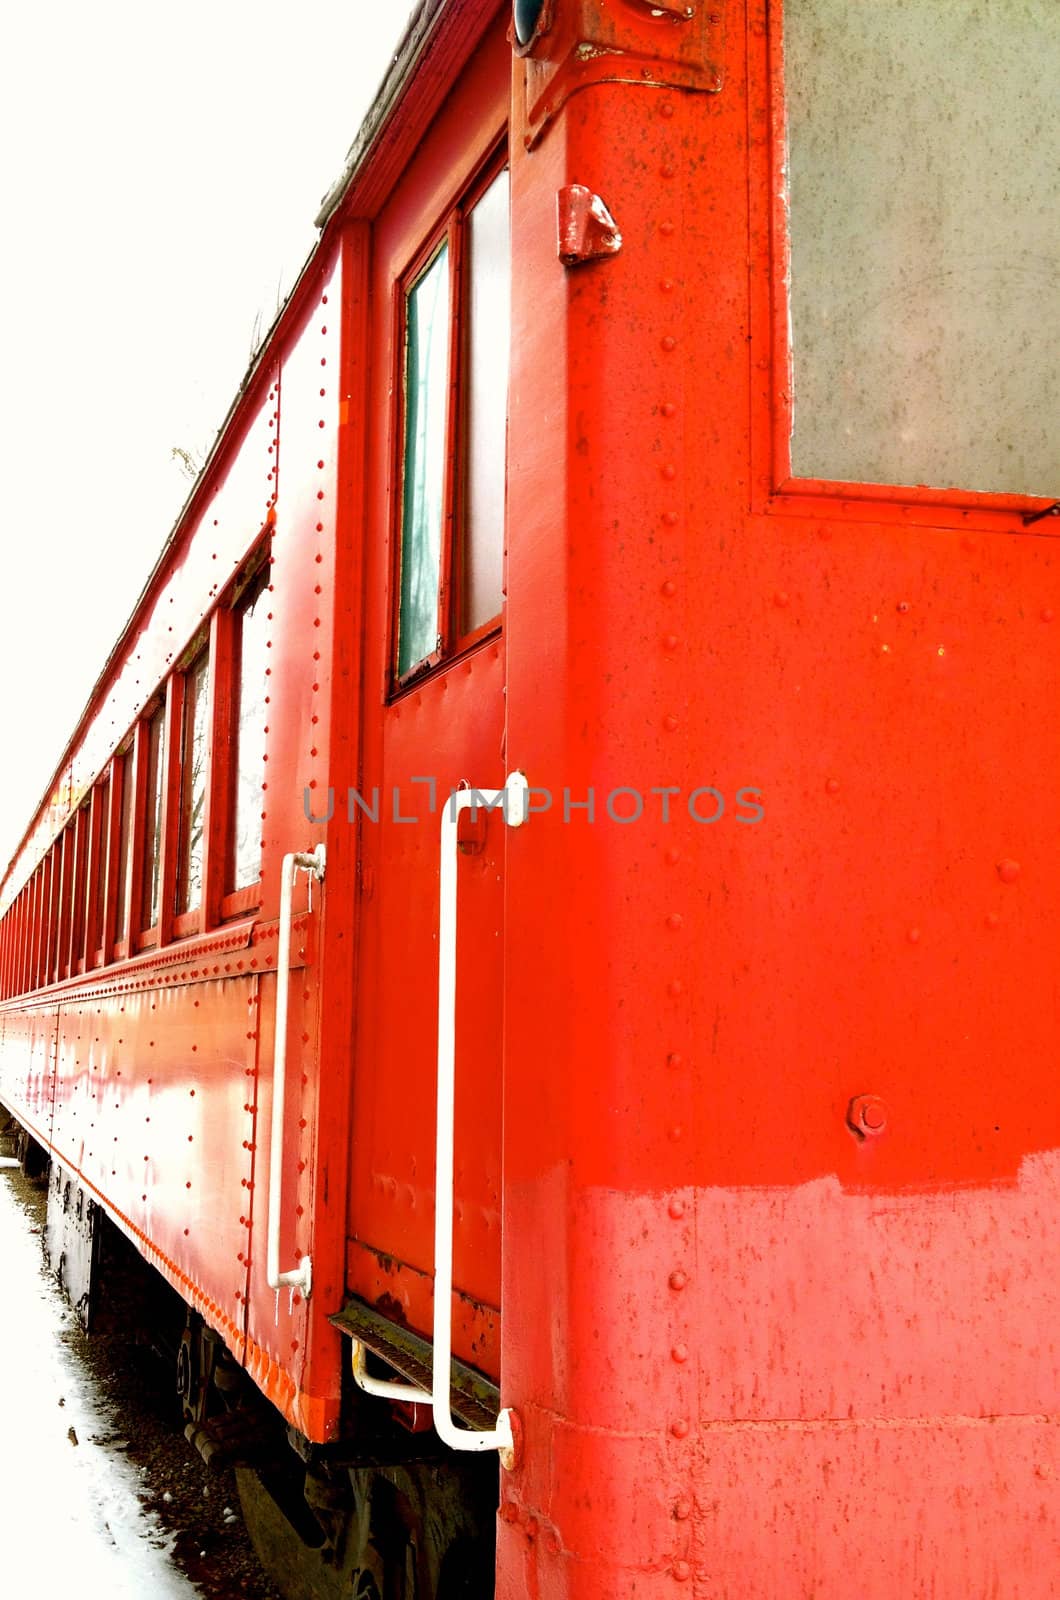 Red train car by RefocusPhoto